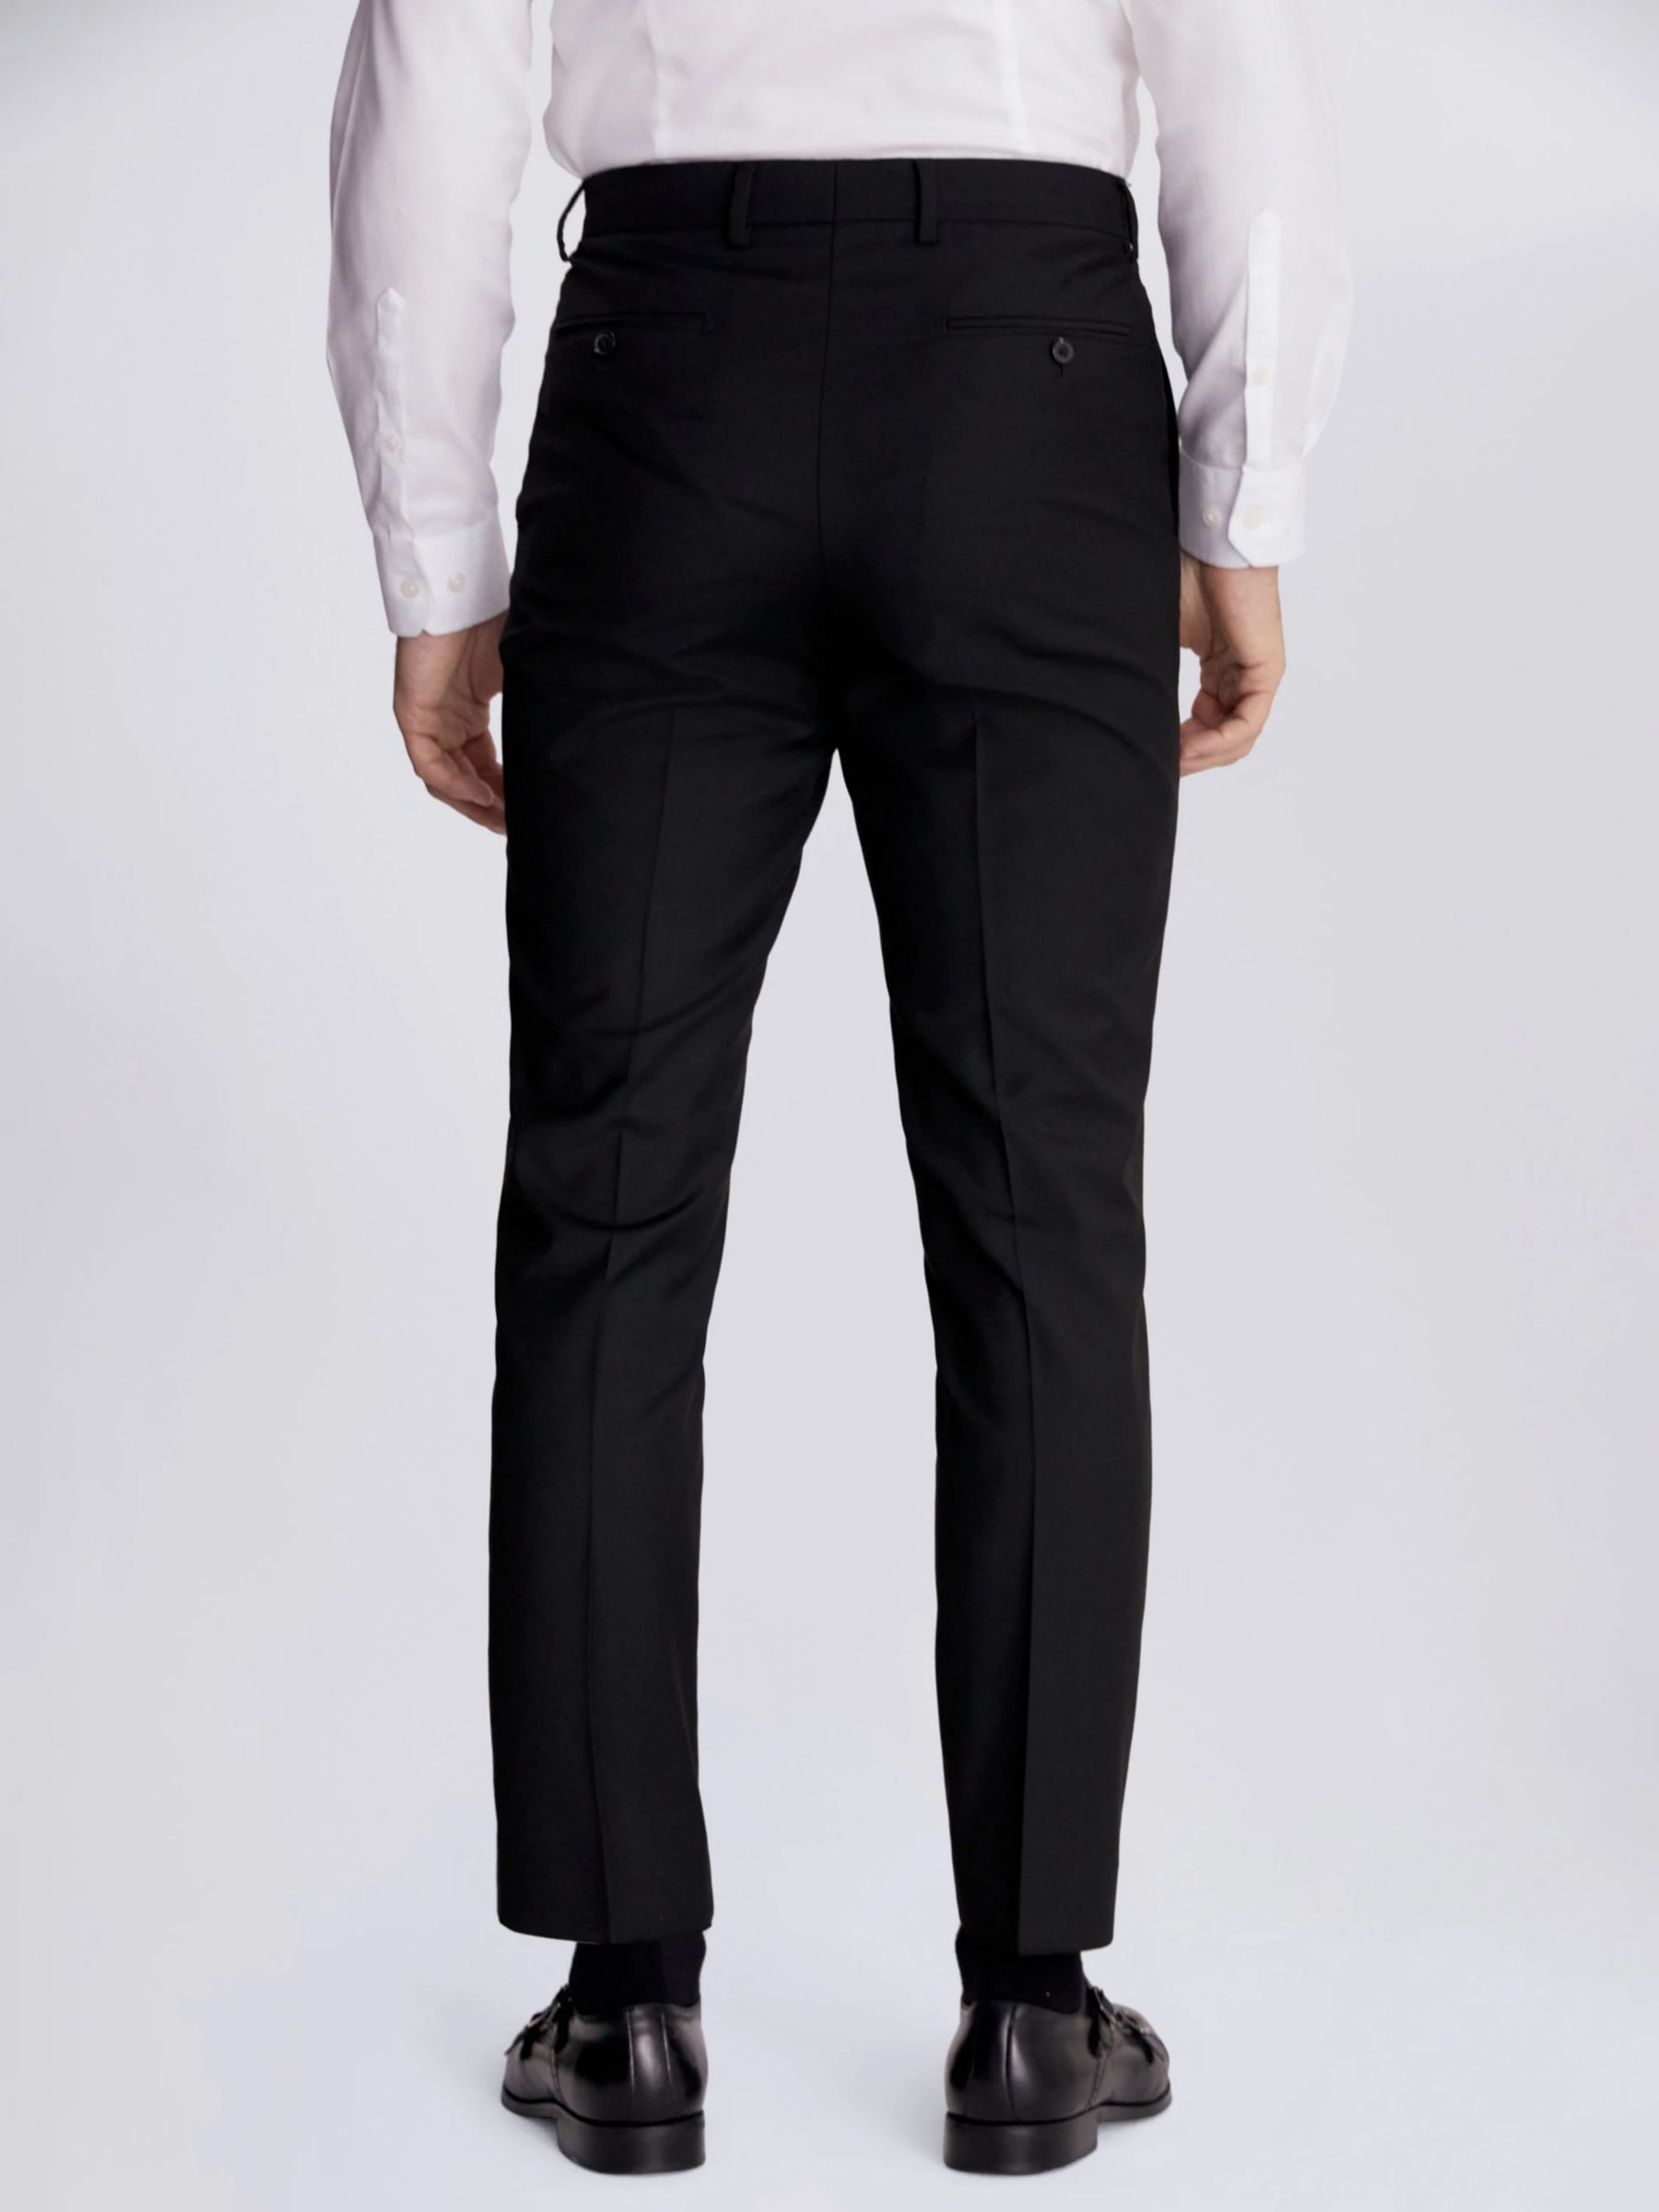 Buy Moss Slim Fit Stretch Trousers Online at johnlewis.com